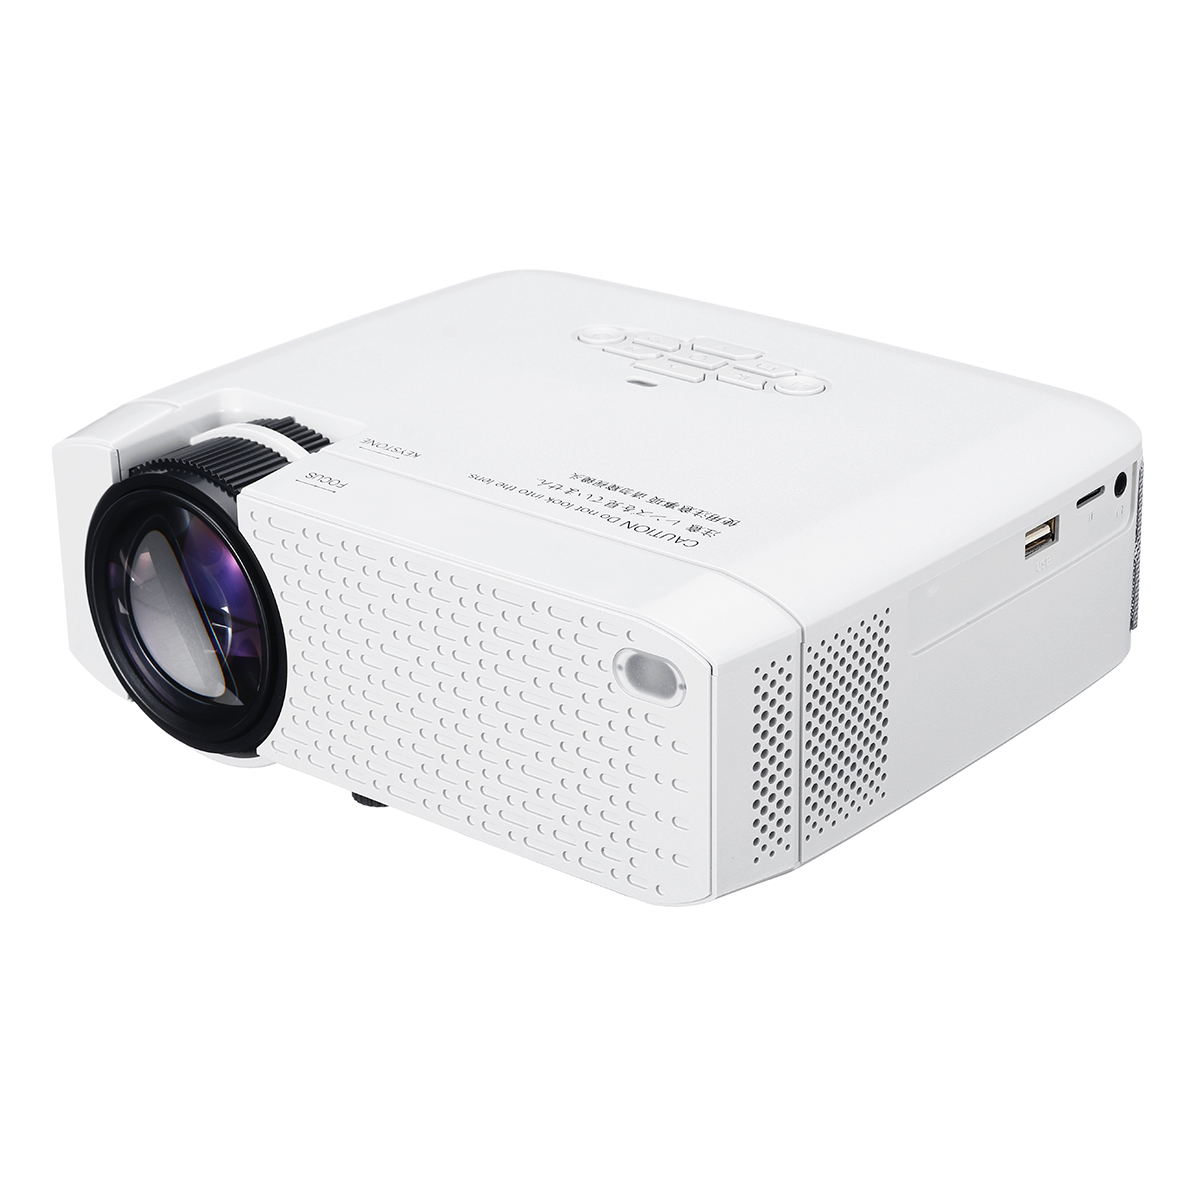 

AUN D40W Mini Projector LED 1600 Lumens Support HD Wireless Sync Display For iPhone/Android PhoneVideo Beamer for Home Cinema